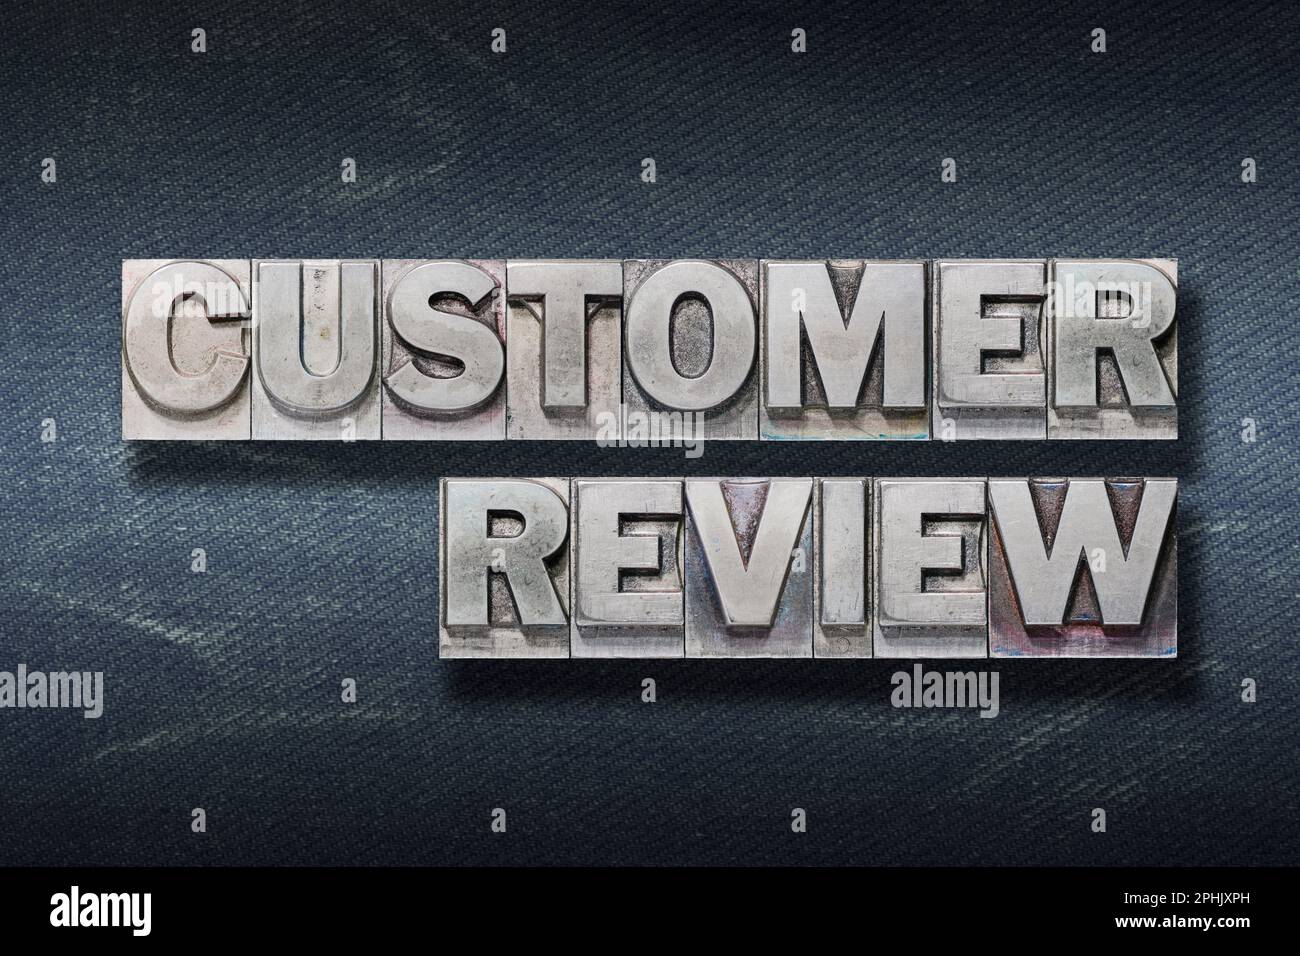 customer review phrase made from metallic letterpress on dark jeans background Stock Photo